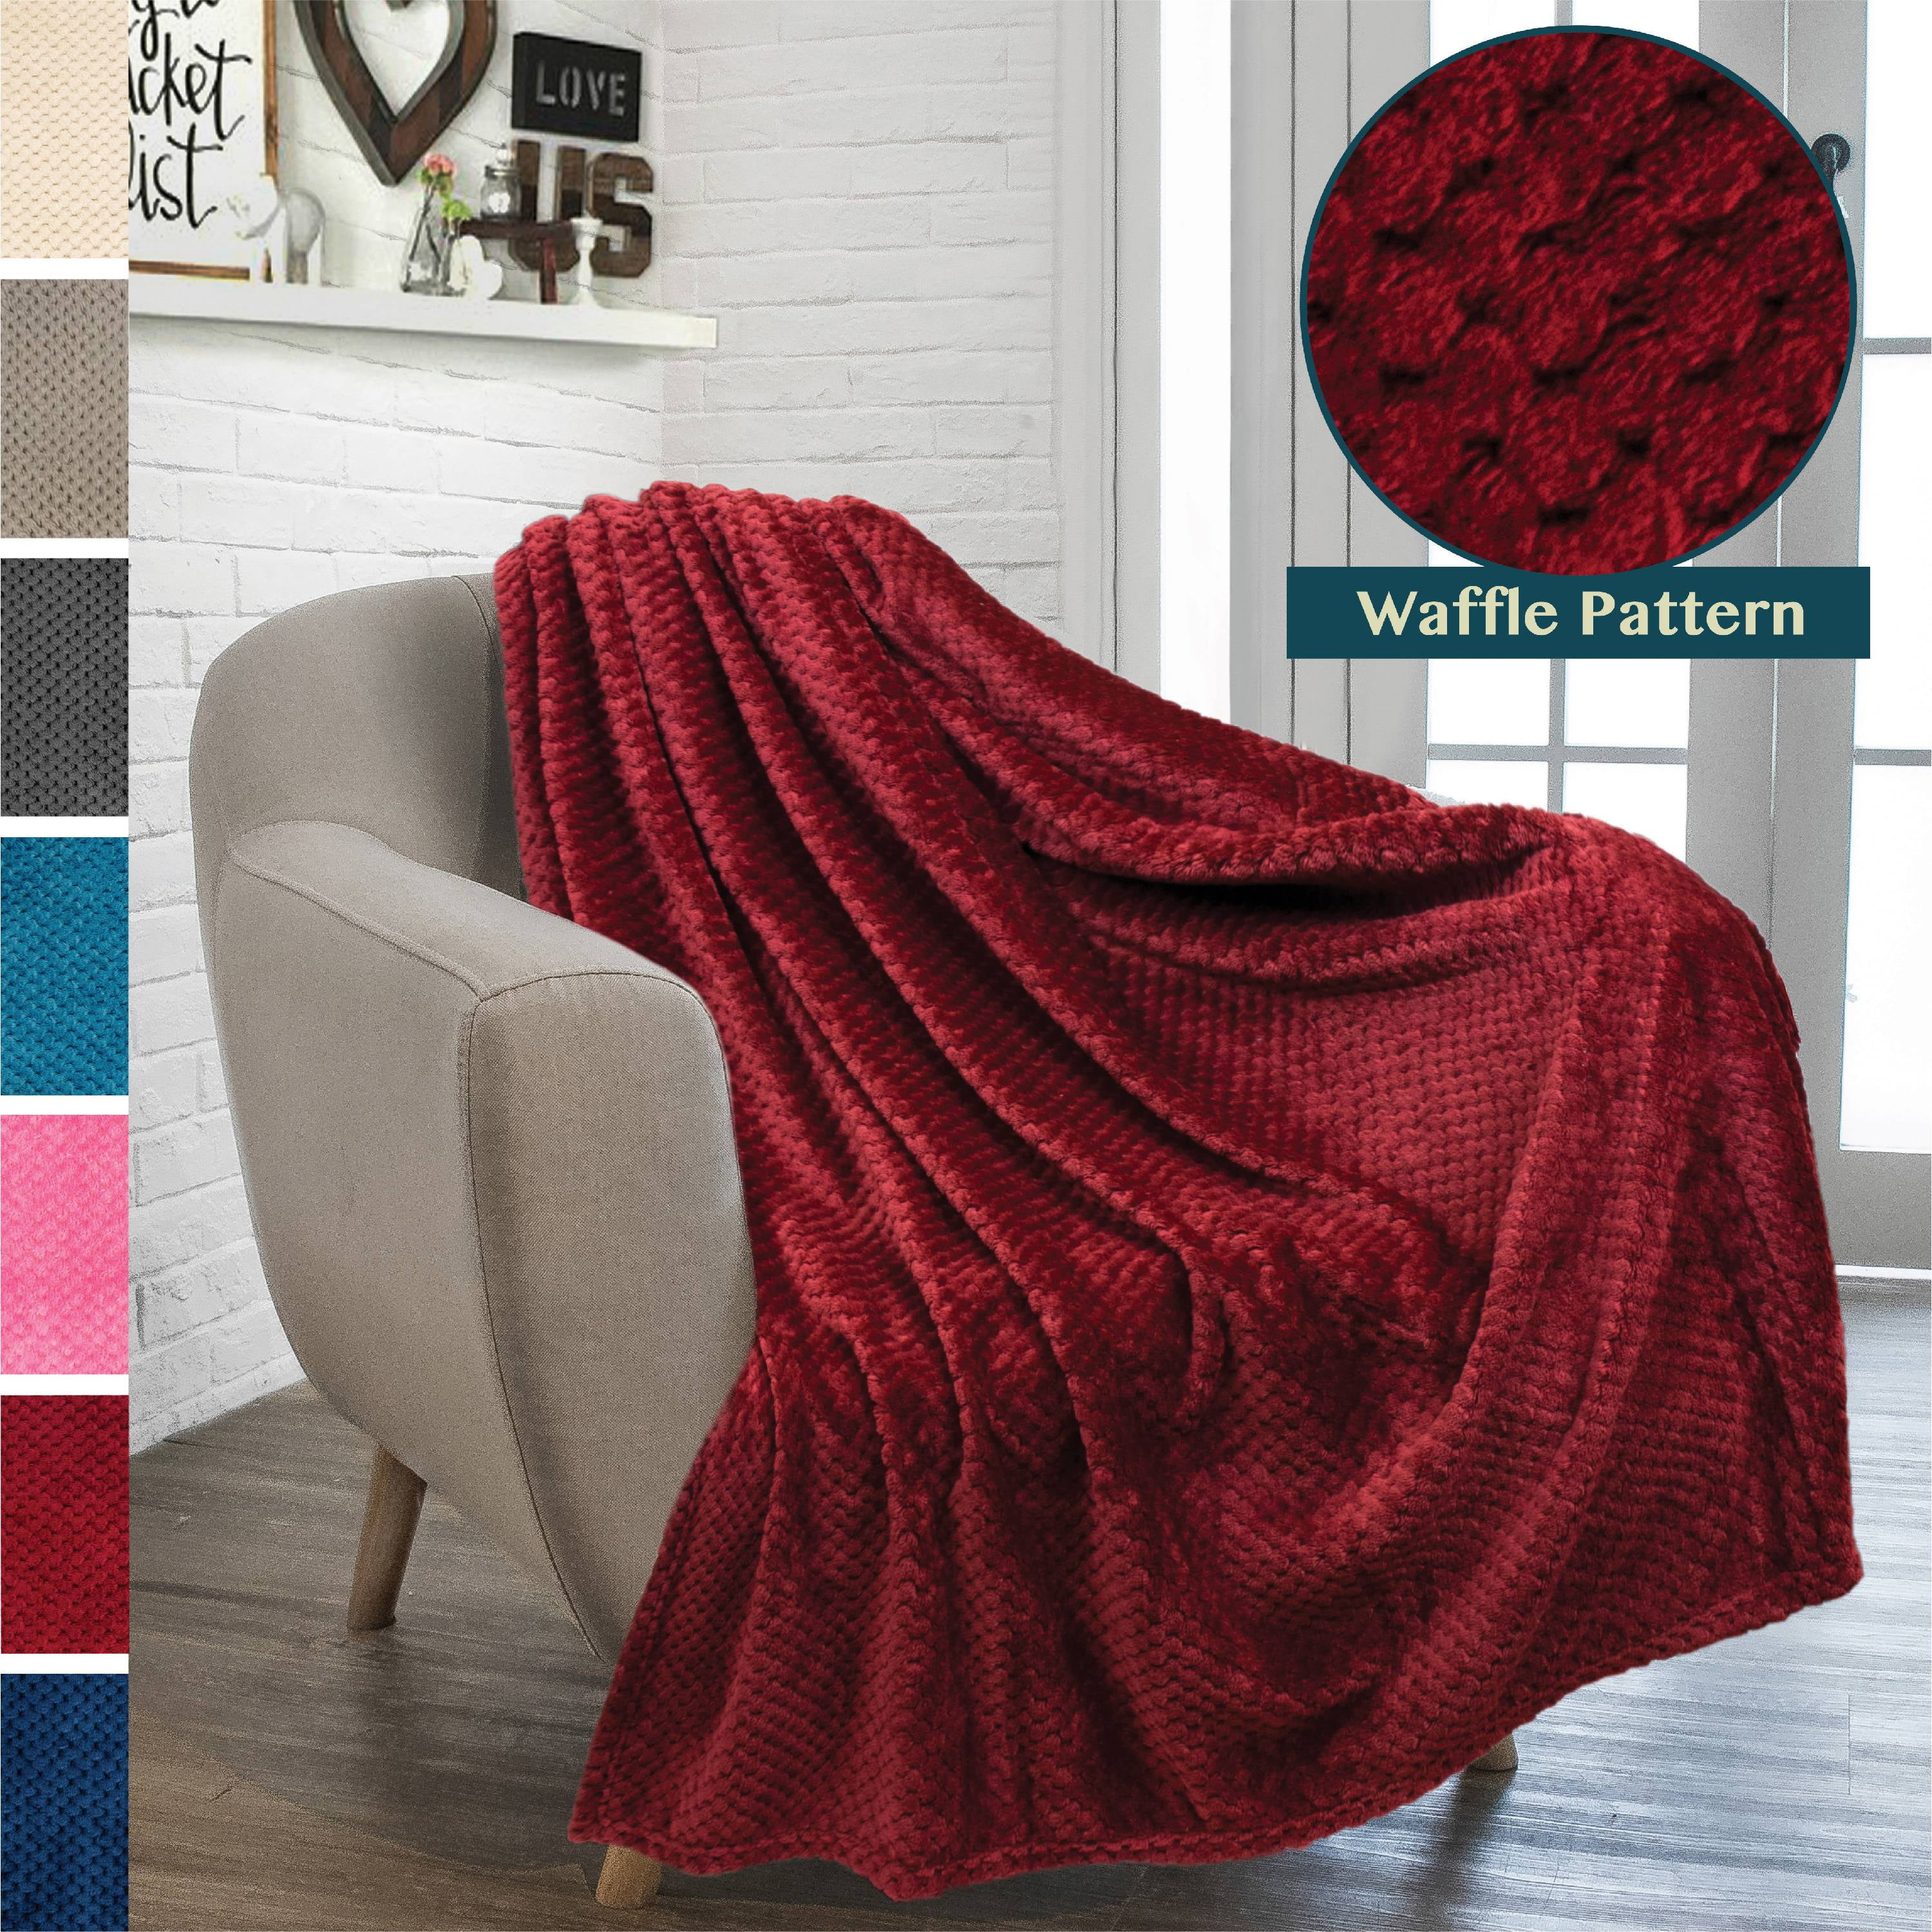 Autumn Leaves Vintage Design All-Season Lightweight Soft Cozy Flannel Fleece Plush Throw Blanket for Travel Bed Sofa Double-Sided Print 